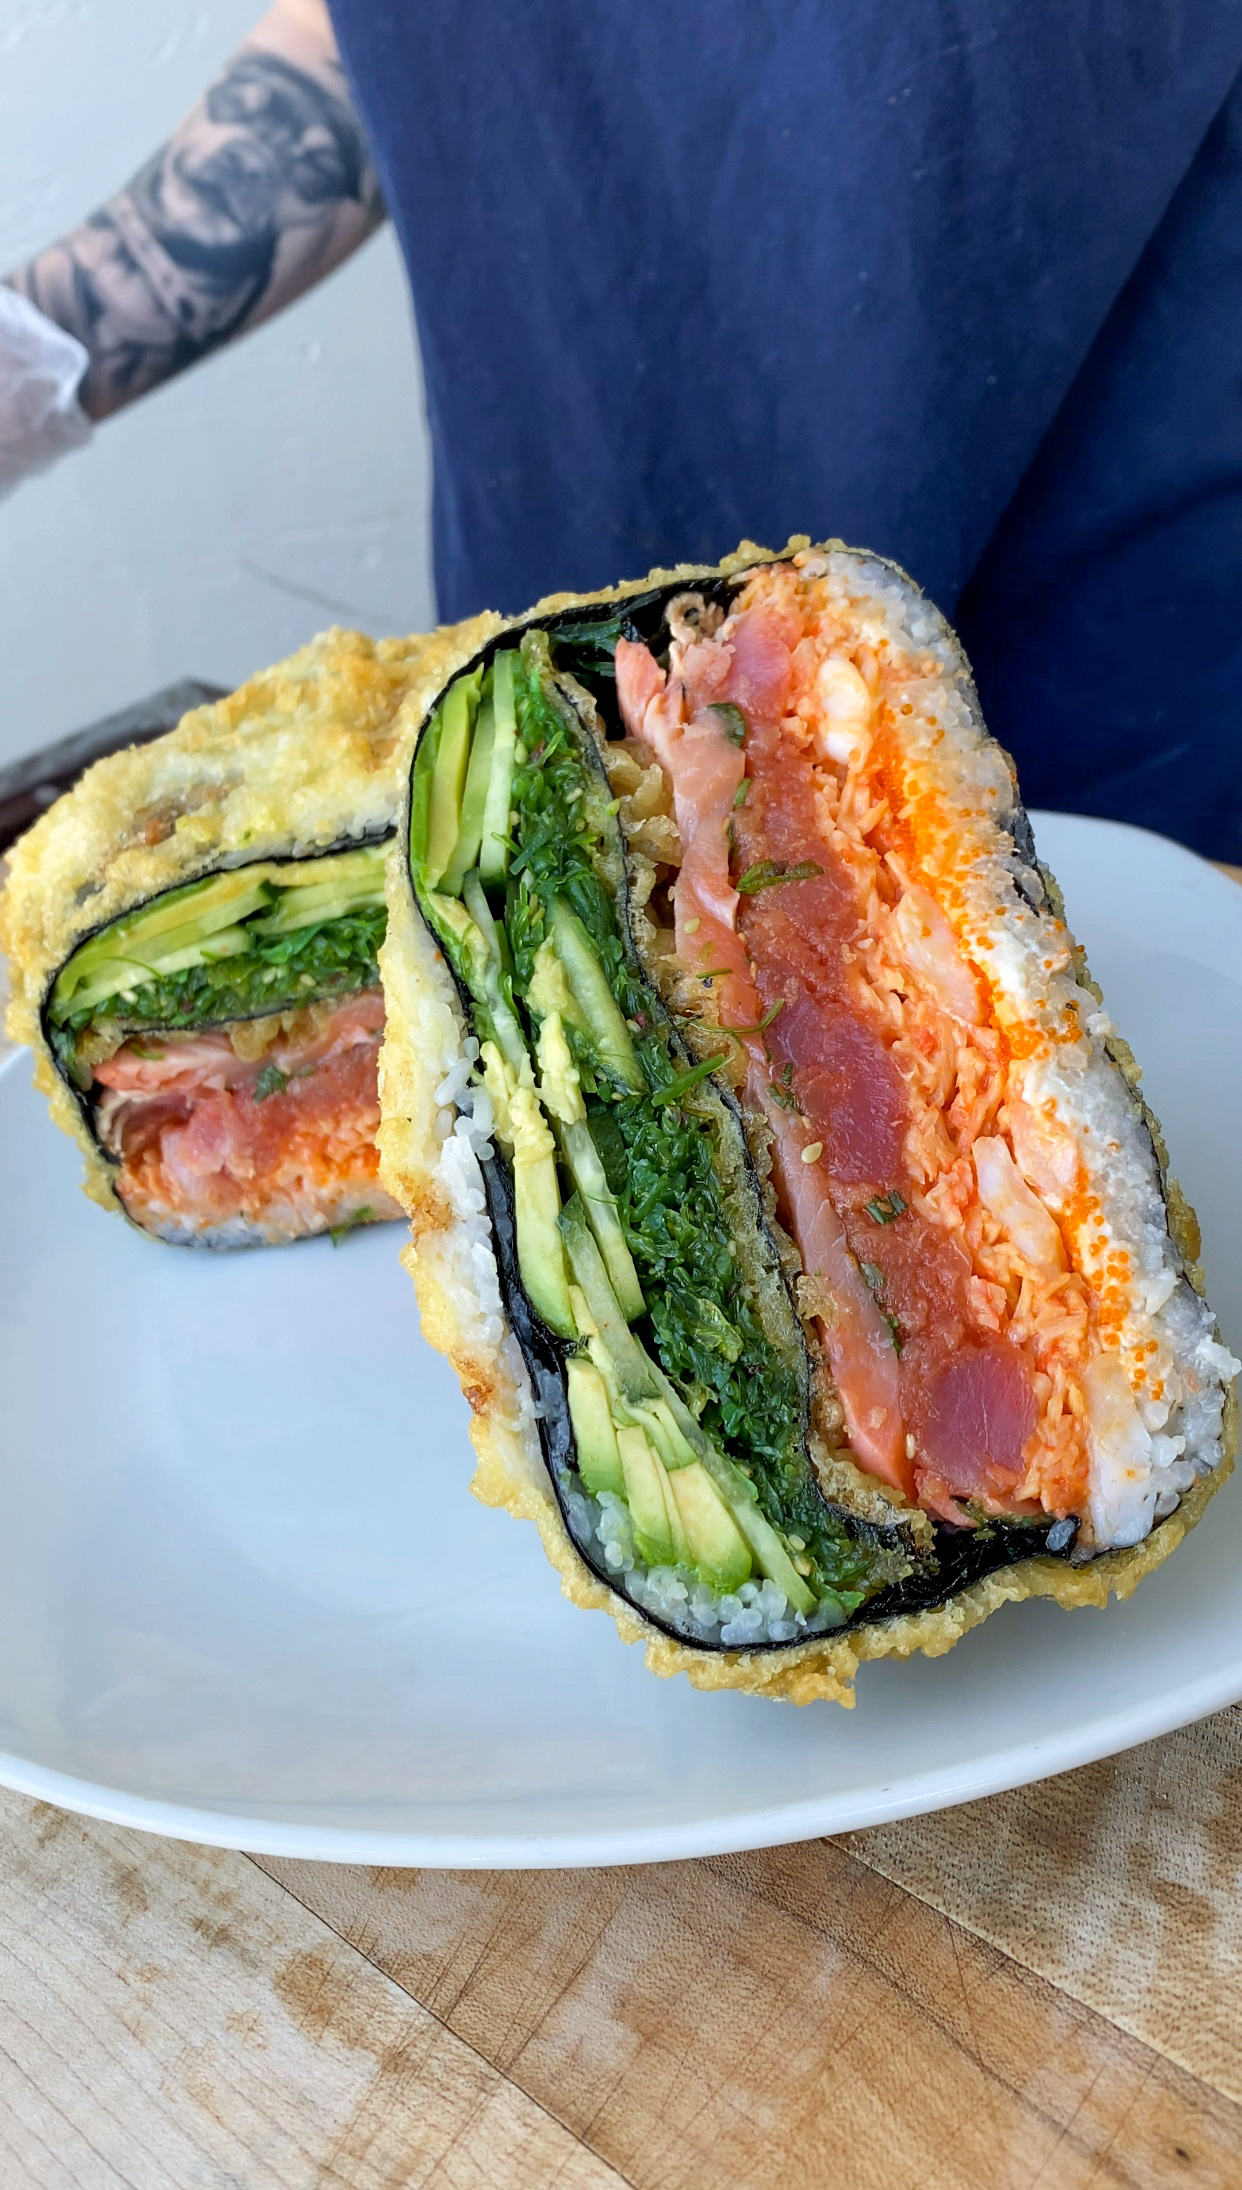 PHOTO: A sushi crunch wrap from Wave Asian Bistro & Sushi in Mount Dora, Florida.